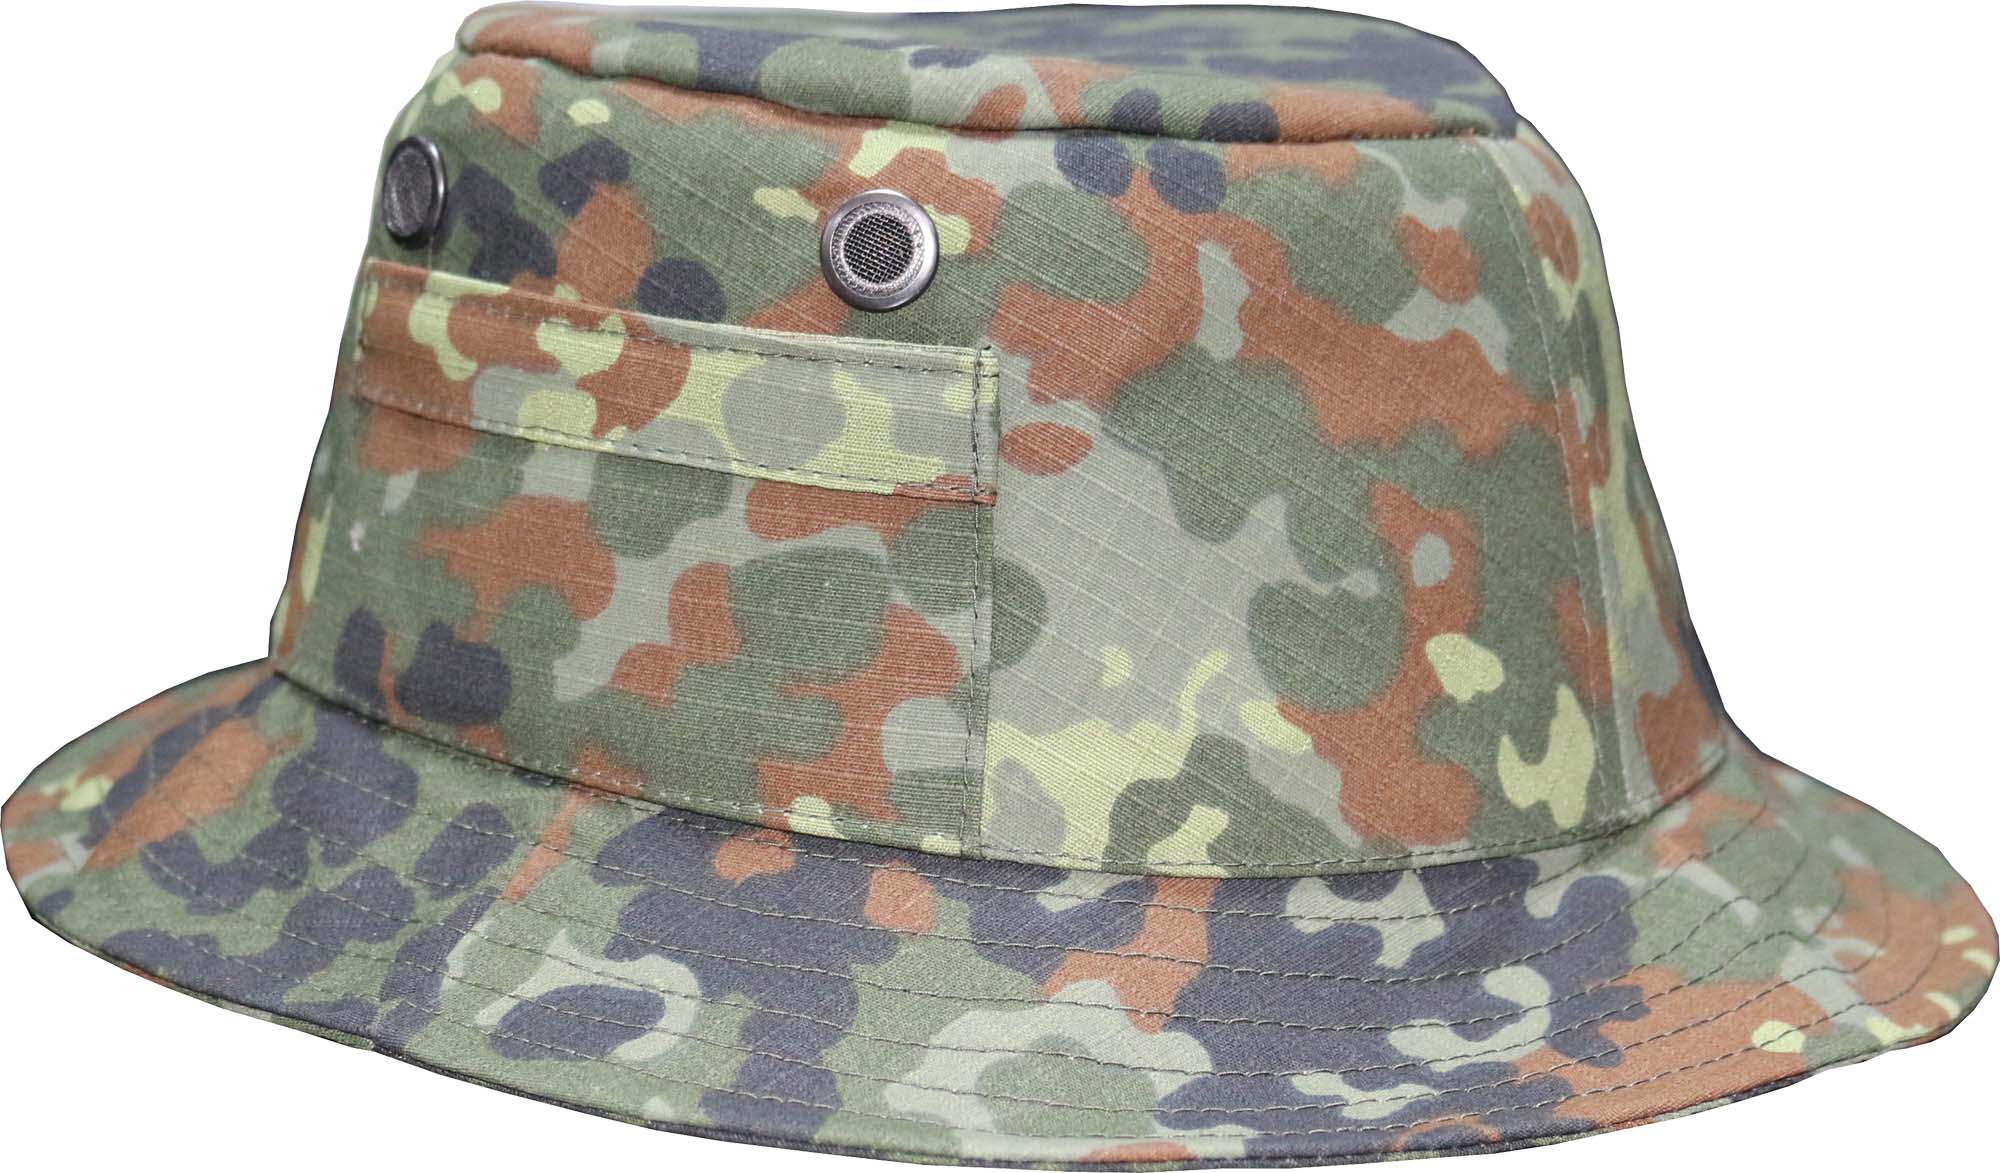 Military and Combat Jungle Camo Hat